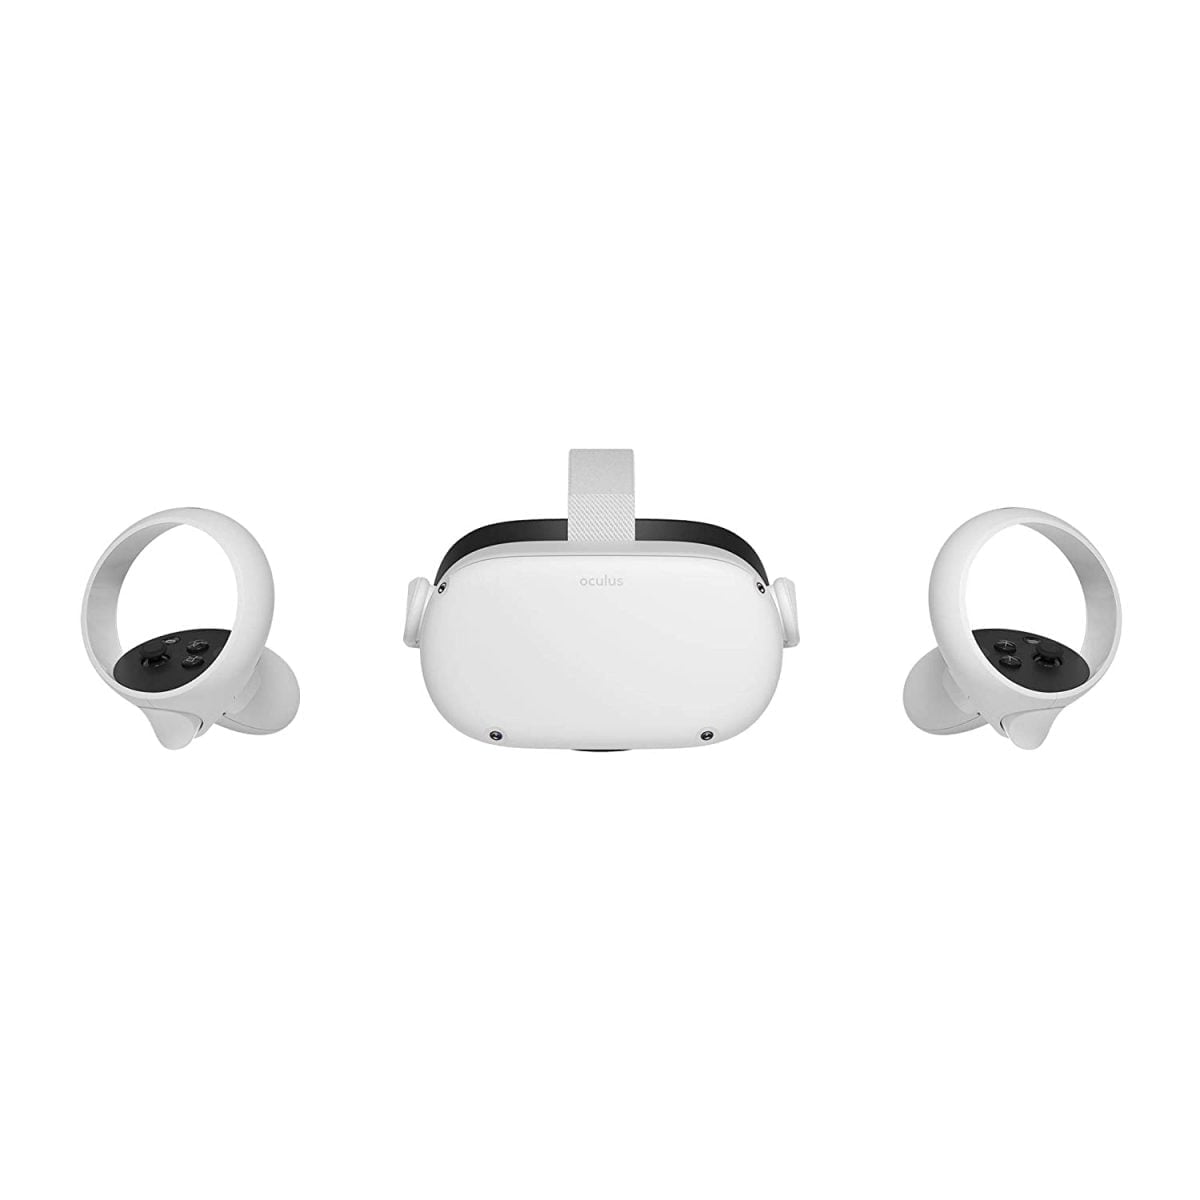 61Nrs7Qqzel. Sl1500 Oculus &Lt;H1&Gt;Meta Quest 2 128 Gb Advanced All-In-One Virtual Reality Headset&Lt;/H1&Gt; Https://Youtu.be/Atvgl9Wojsm &Lt;Ul Class=&Quot;A-Unordered-List A-Vertical A-Spacing-Mini&Quot;&Gt; &Lt;Li&Gt;&Lt;Span Class=&Quot;A-List-Item&Quot;&Gt;Voltage: 100-240 V&Lt;/Span&Gt;&Lt;/Li&Gt; &Lt;Li&Gt;&Lt;Span Class=&Quot;A-List-Item&Quot;&Gt;Next-Level Hardware - Make Every Move Count With A Blazing-Fast Processor And Our Highest-Resolution Display&Lt;/Span&Gt;&Lt;/Li&Gt; &Lt;Li&Gt;&Lt;Span Class=&Quot;A-List-Item&Quot;&Gt;All-In-One Gaming - With Backward Compatibility, You Can Explore New Titles And Old Favorites In The Expansive Quest Content Library&Lt;/Span&Gt;&Lt;/Li&Gt; &Lt;Li&Gt;&Lt;Span Class=&Quot;A-List-Item&Quot;&Gt;Immersive Entertainment - Get The Best Seat In The House To Live Concerts, Groundbreaking Films, Exclusive Events And More&Lt;/Span&Gt;&Lt;/Li&Gt; &Lt;Li&Gt;&Lt;Span Class=&Quot;A-List-Item&Quot;&Gt;Easy Setup - Just Open The Box, Set Up With The Smartphone App And Jump Into Vr. No Pc Or Console Needed. Requires Wireless Internet Access And The Oculus App (Free Download) To Set Up Device Premium Display - Catch Every Detail With A Stunning Display That Features 50% More Pixels Than The Original Quest Ultimate Control - Redesigned Oculus Touch Controllers Transport Your Movements Directly Into Vr With Intuitive Controls Pc Vr Compatible - Step Into Incredible Oculus Rift Titles By Connecting An Oculus Link Cable To A Compatible Gaming Pc. Oculus Link Cable Sold Separately 3D Cinematic Sound - Hear In All Directions With Built-In Speakers That Deliver Cinematic 3D Positional Audio&Lt;/Span&Gt;&Lt;/Li&Gt; &Lt;/Ul&Gt; &Nbsp; Meta Quest 2 Meta Quest 2 128 Gb Advanced All-In-One Virtual Reality Headset